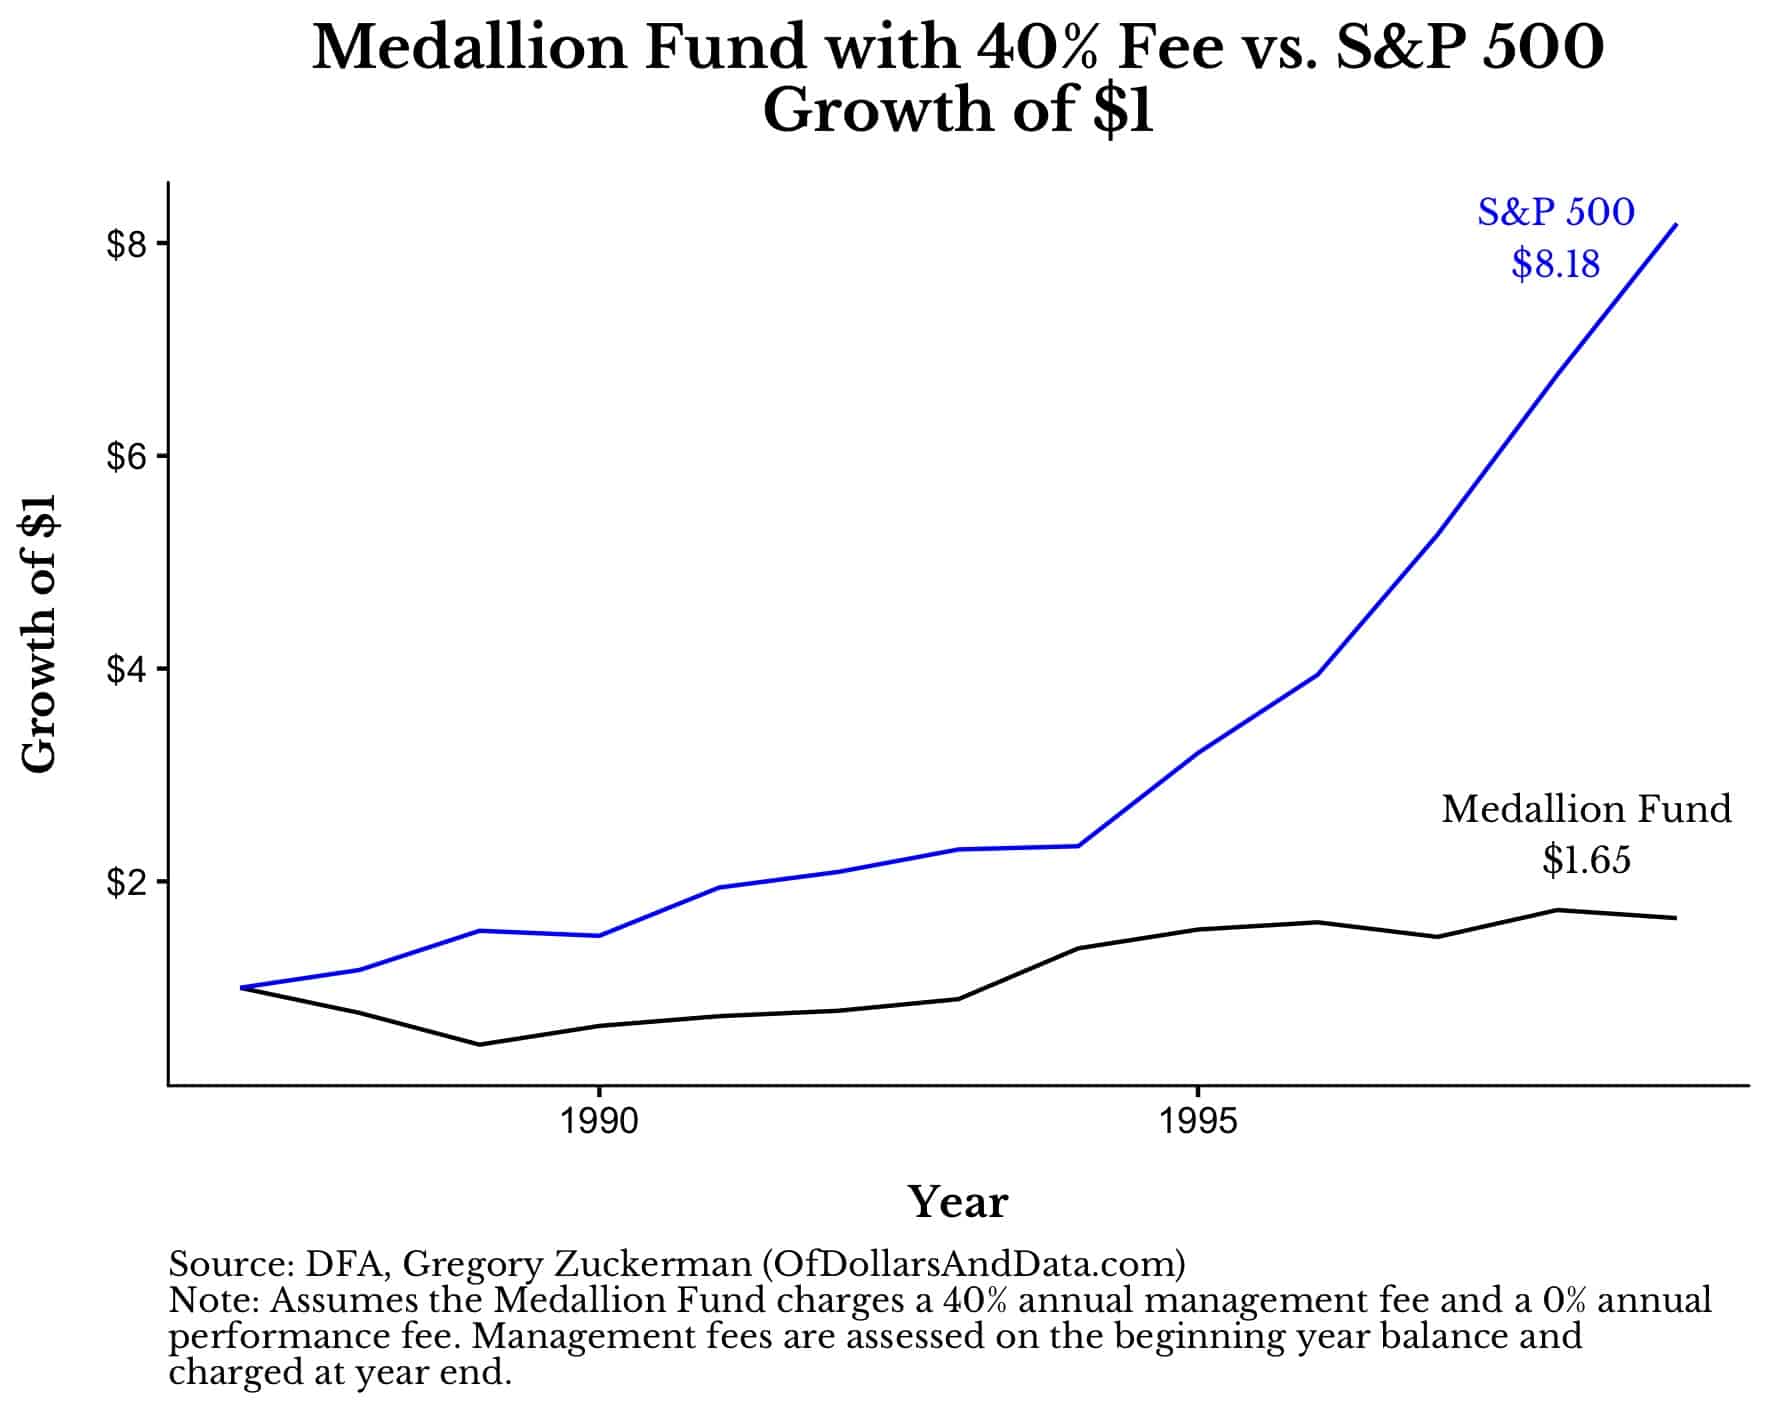 The growth of the Medallion Fund with a 40% fee versus the S&P 500 from the late 1980s until the late 1990s.